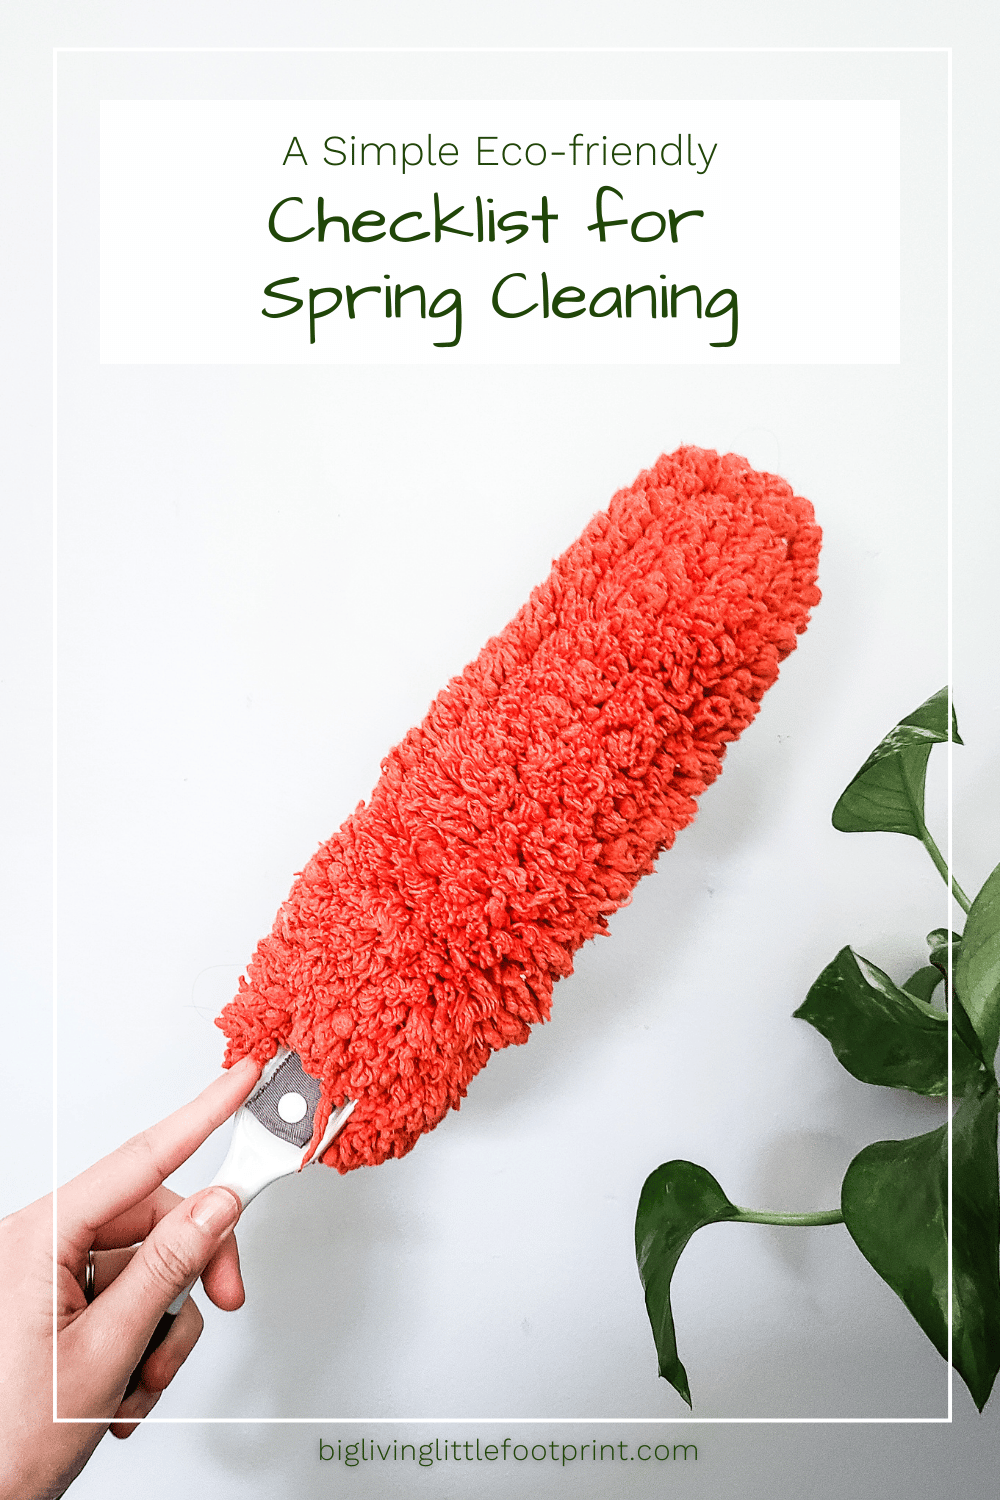 A Simple Eco-friendly Checklist for Spring Cleaning